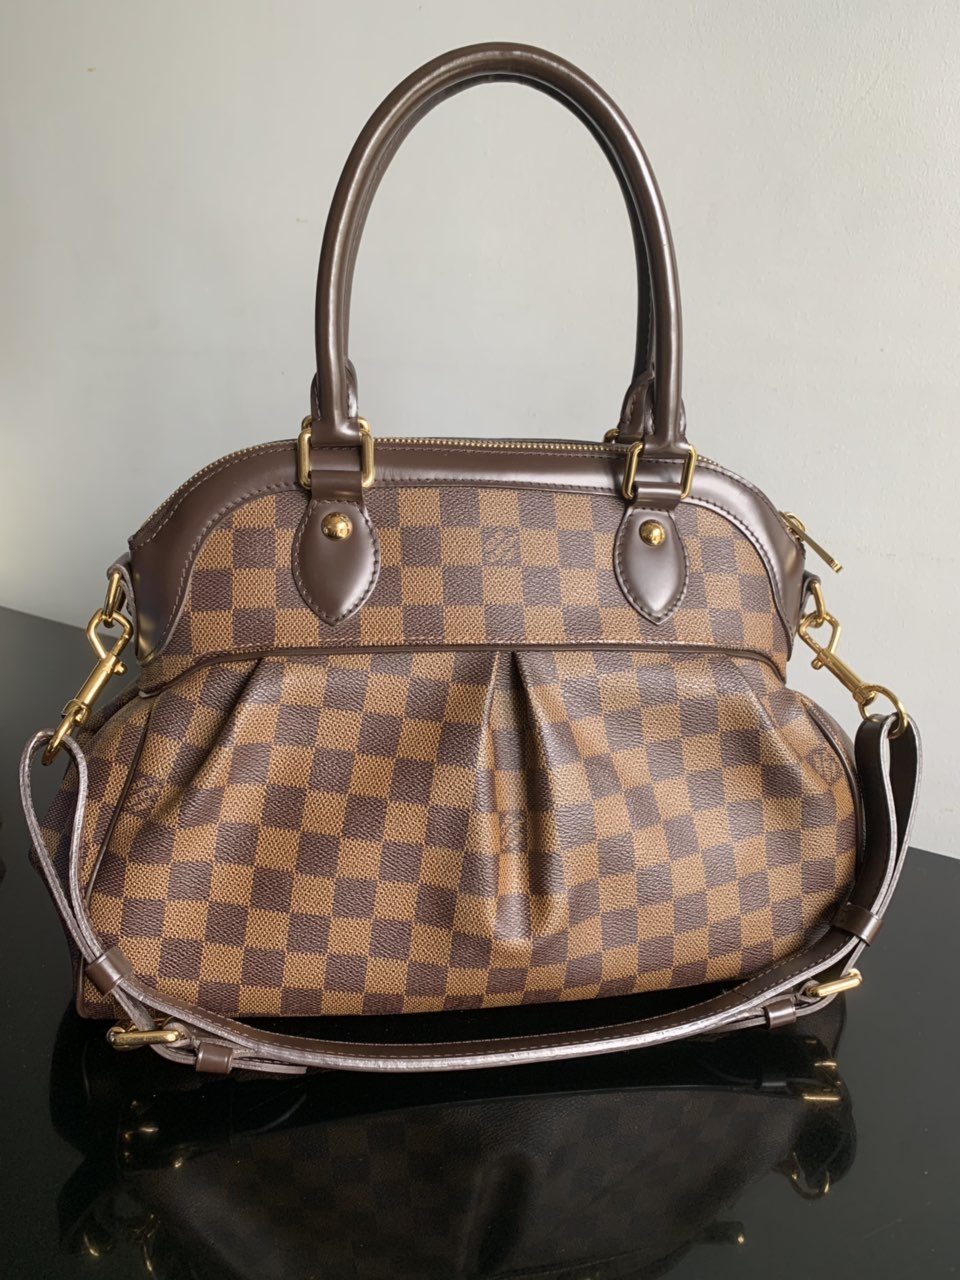 Lv Bags For Sale  Natural Resource Department